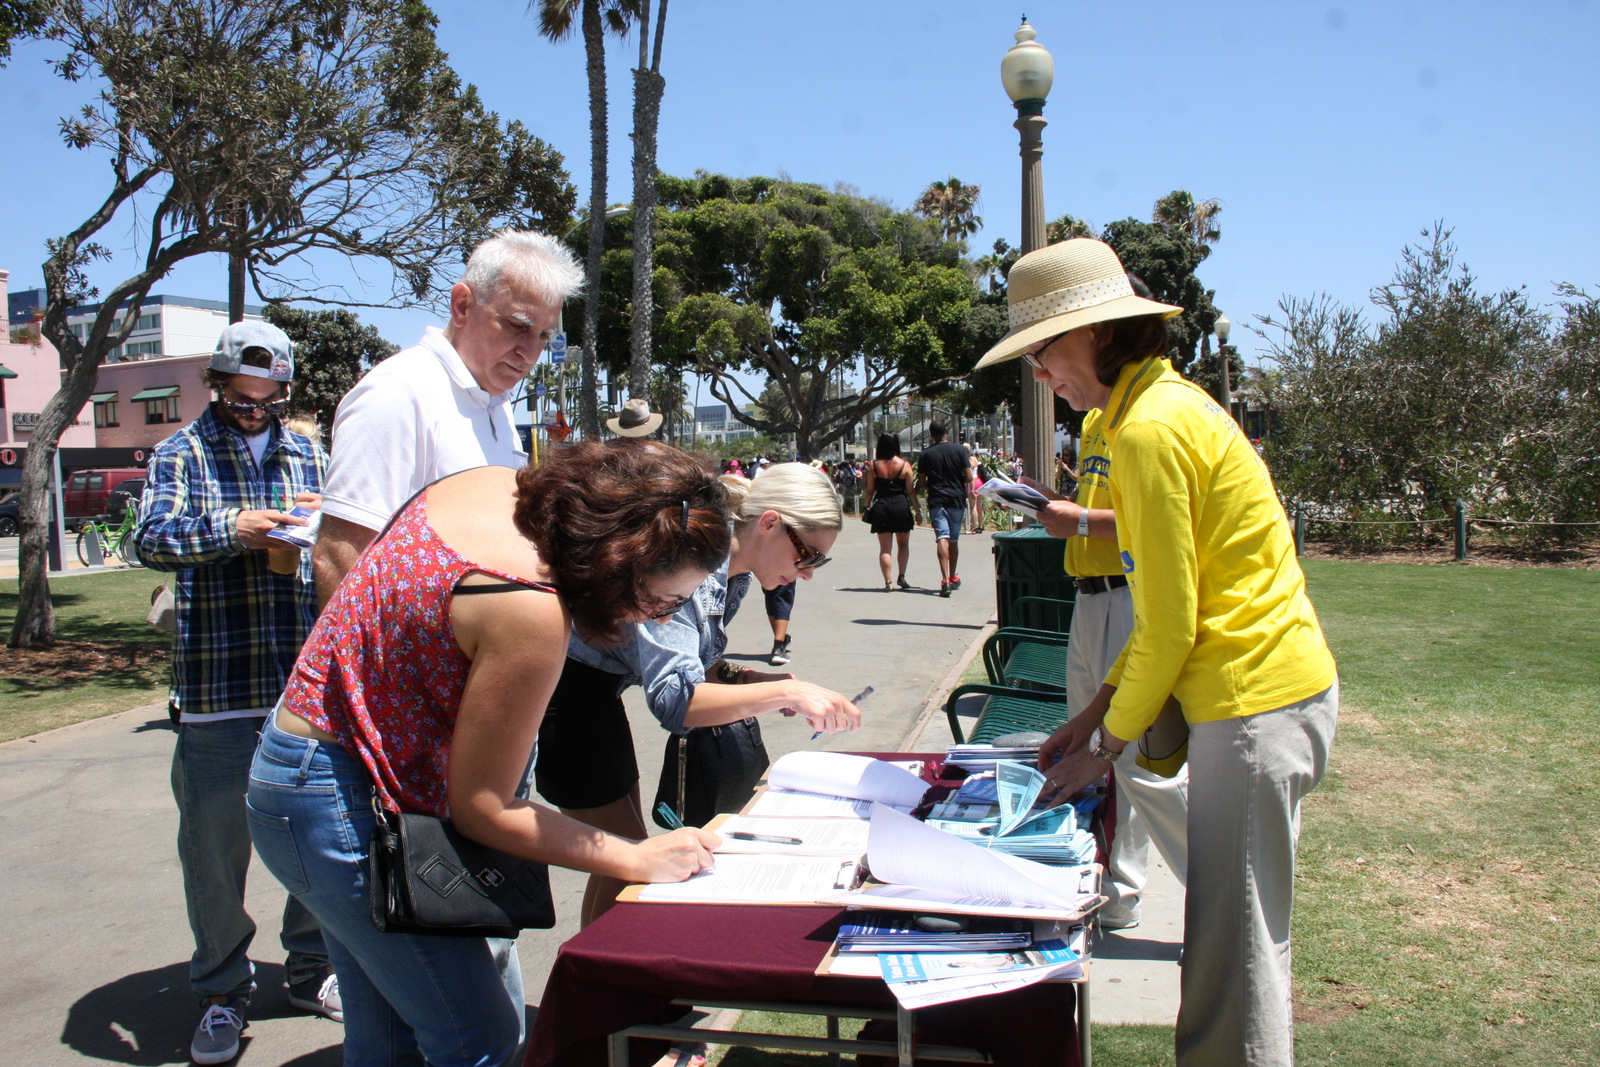 Falun Gong practitioners raise awareness about organ harvesting and other human rights crimes in China, with residents and tourists in Santa Monica, Calif., on July 17. (Xu Touhui/Epoch Times)